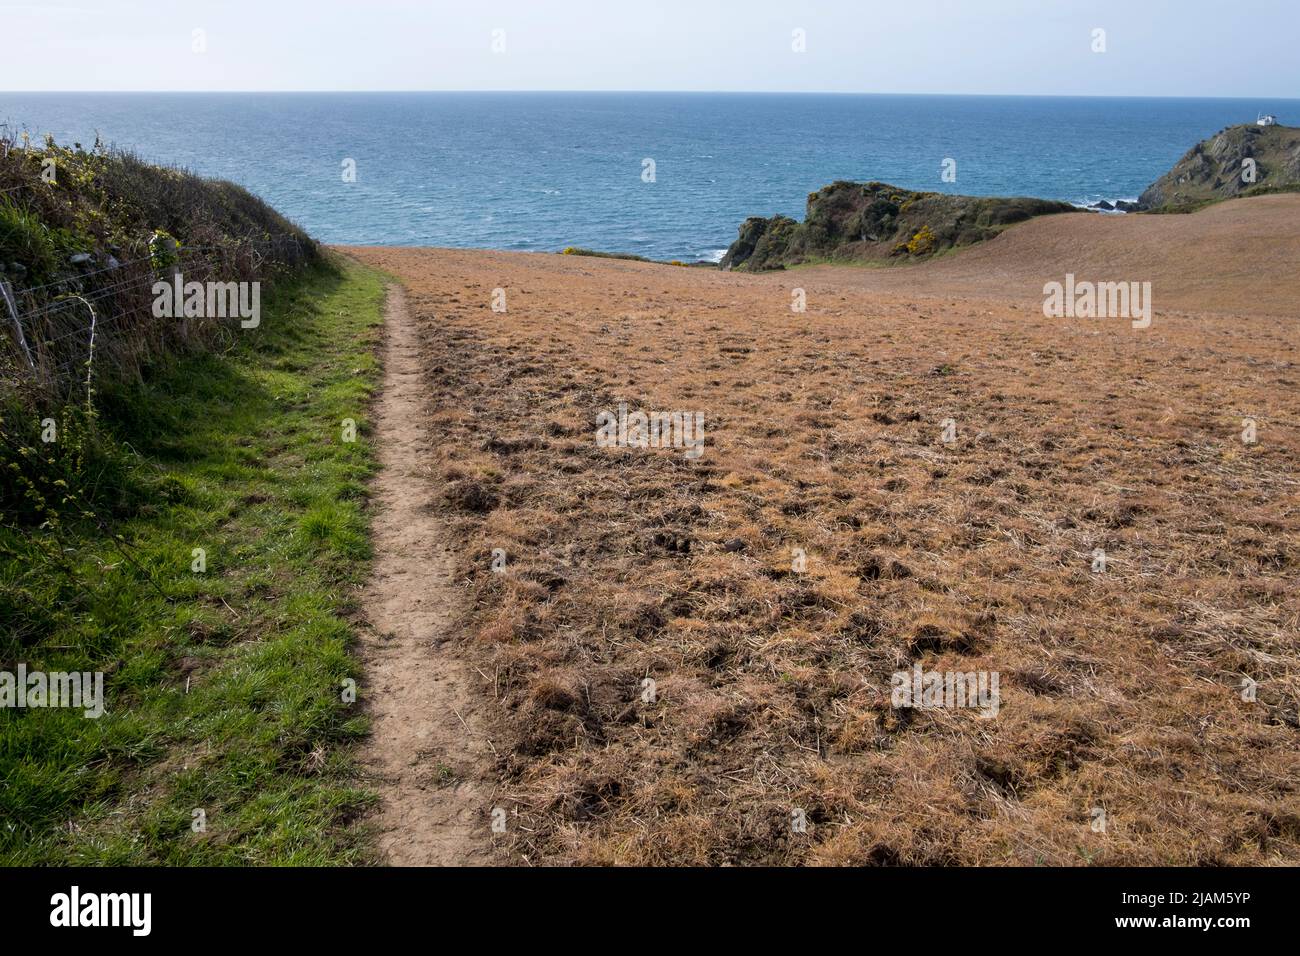 Edge of the field near the sea, showing where farmer has applied weedkiller to the right of the path Stock Photo